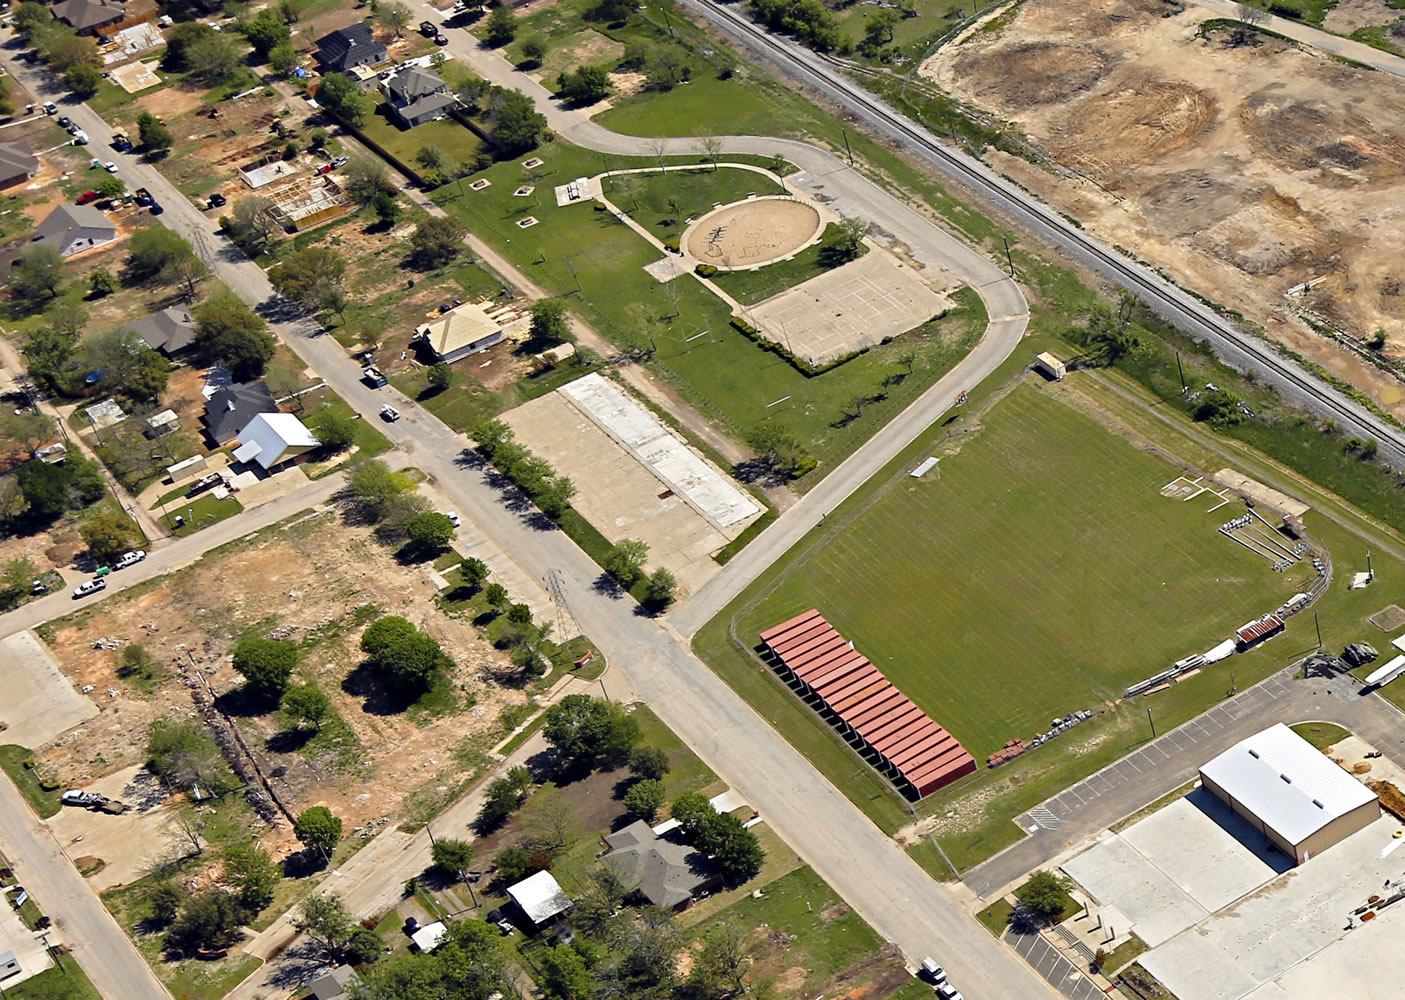 An overall view on April 15 of the area affected by the West, Texas, Fertilizer Company explosion one year earlier.